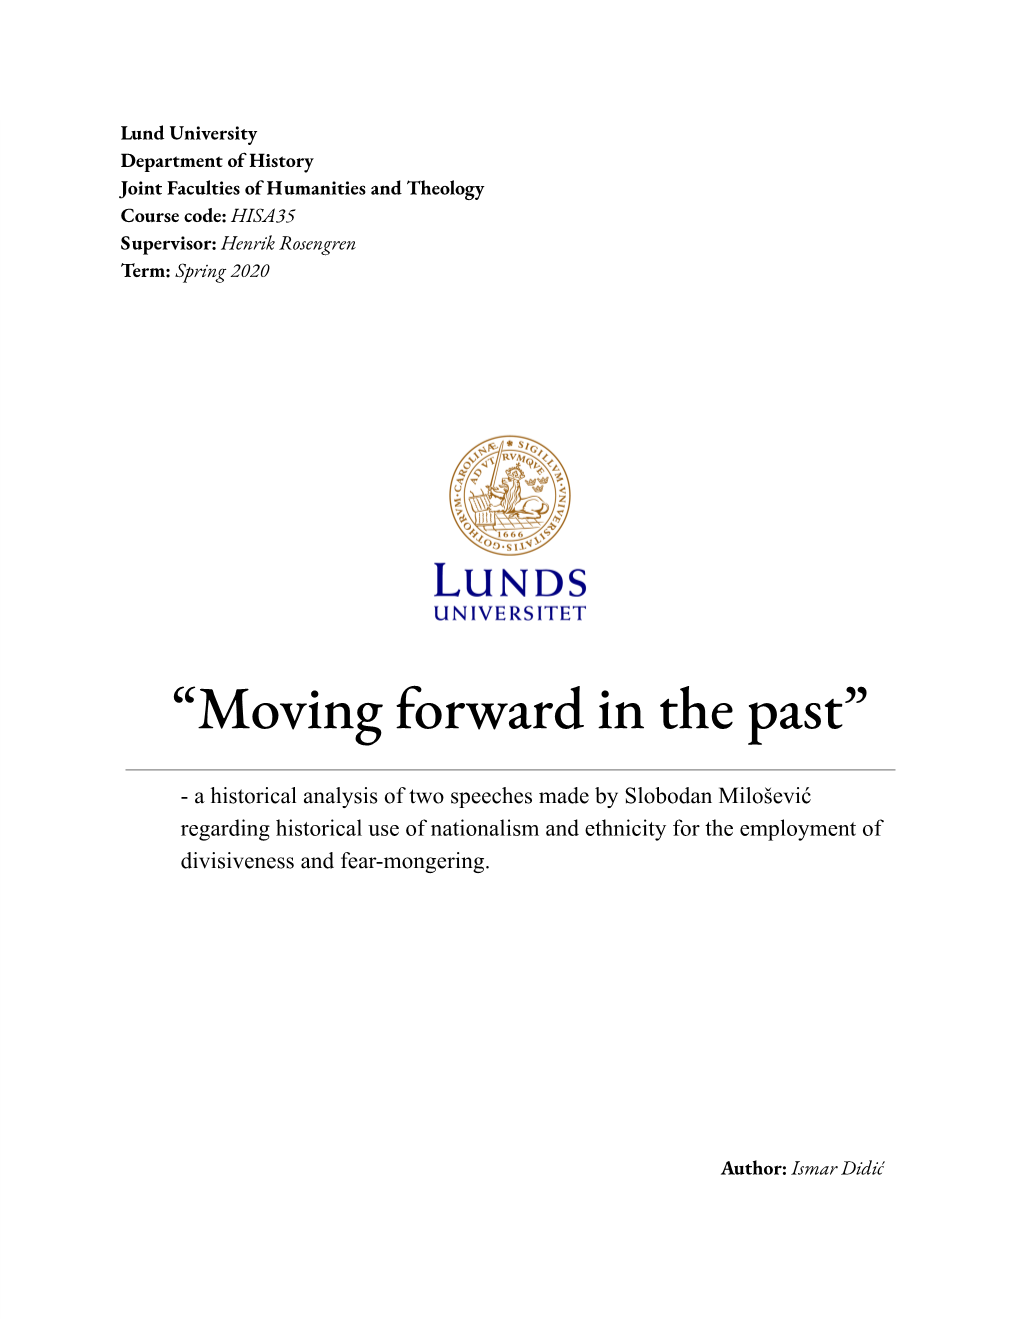 “Moving Forward in the Past”